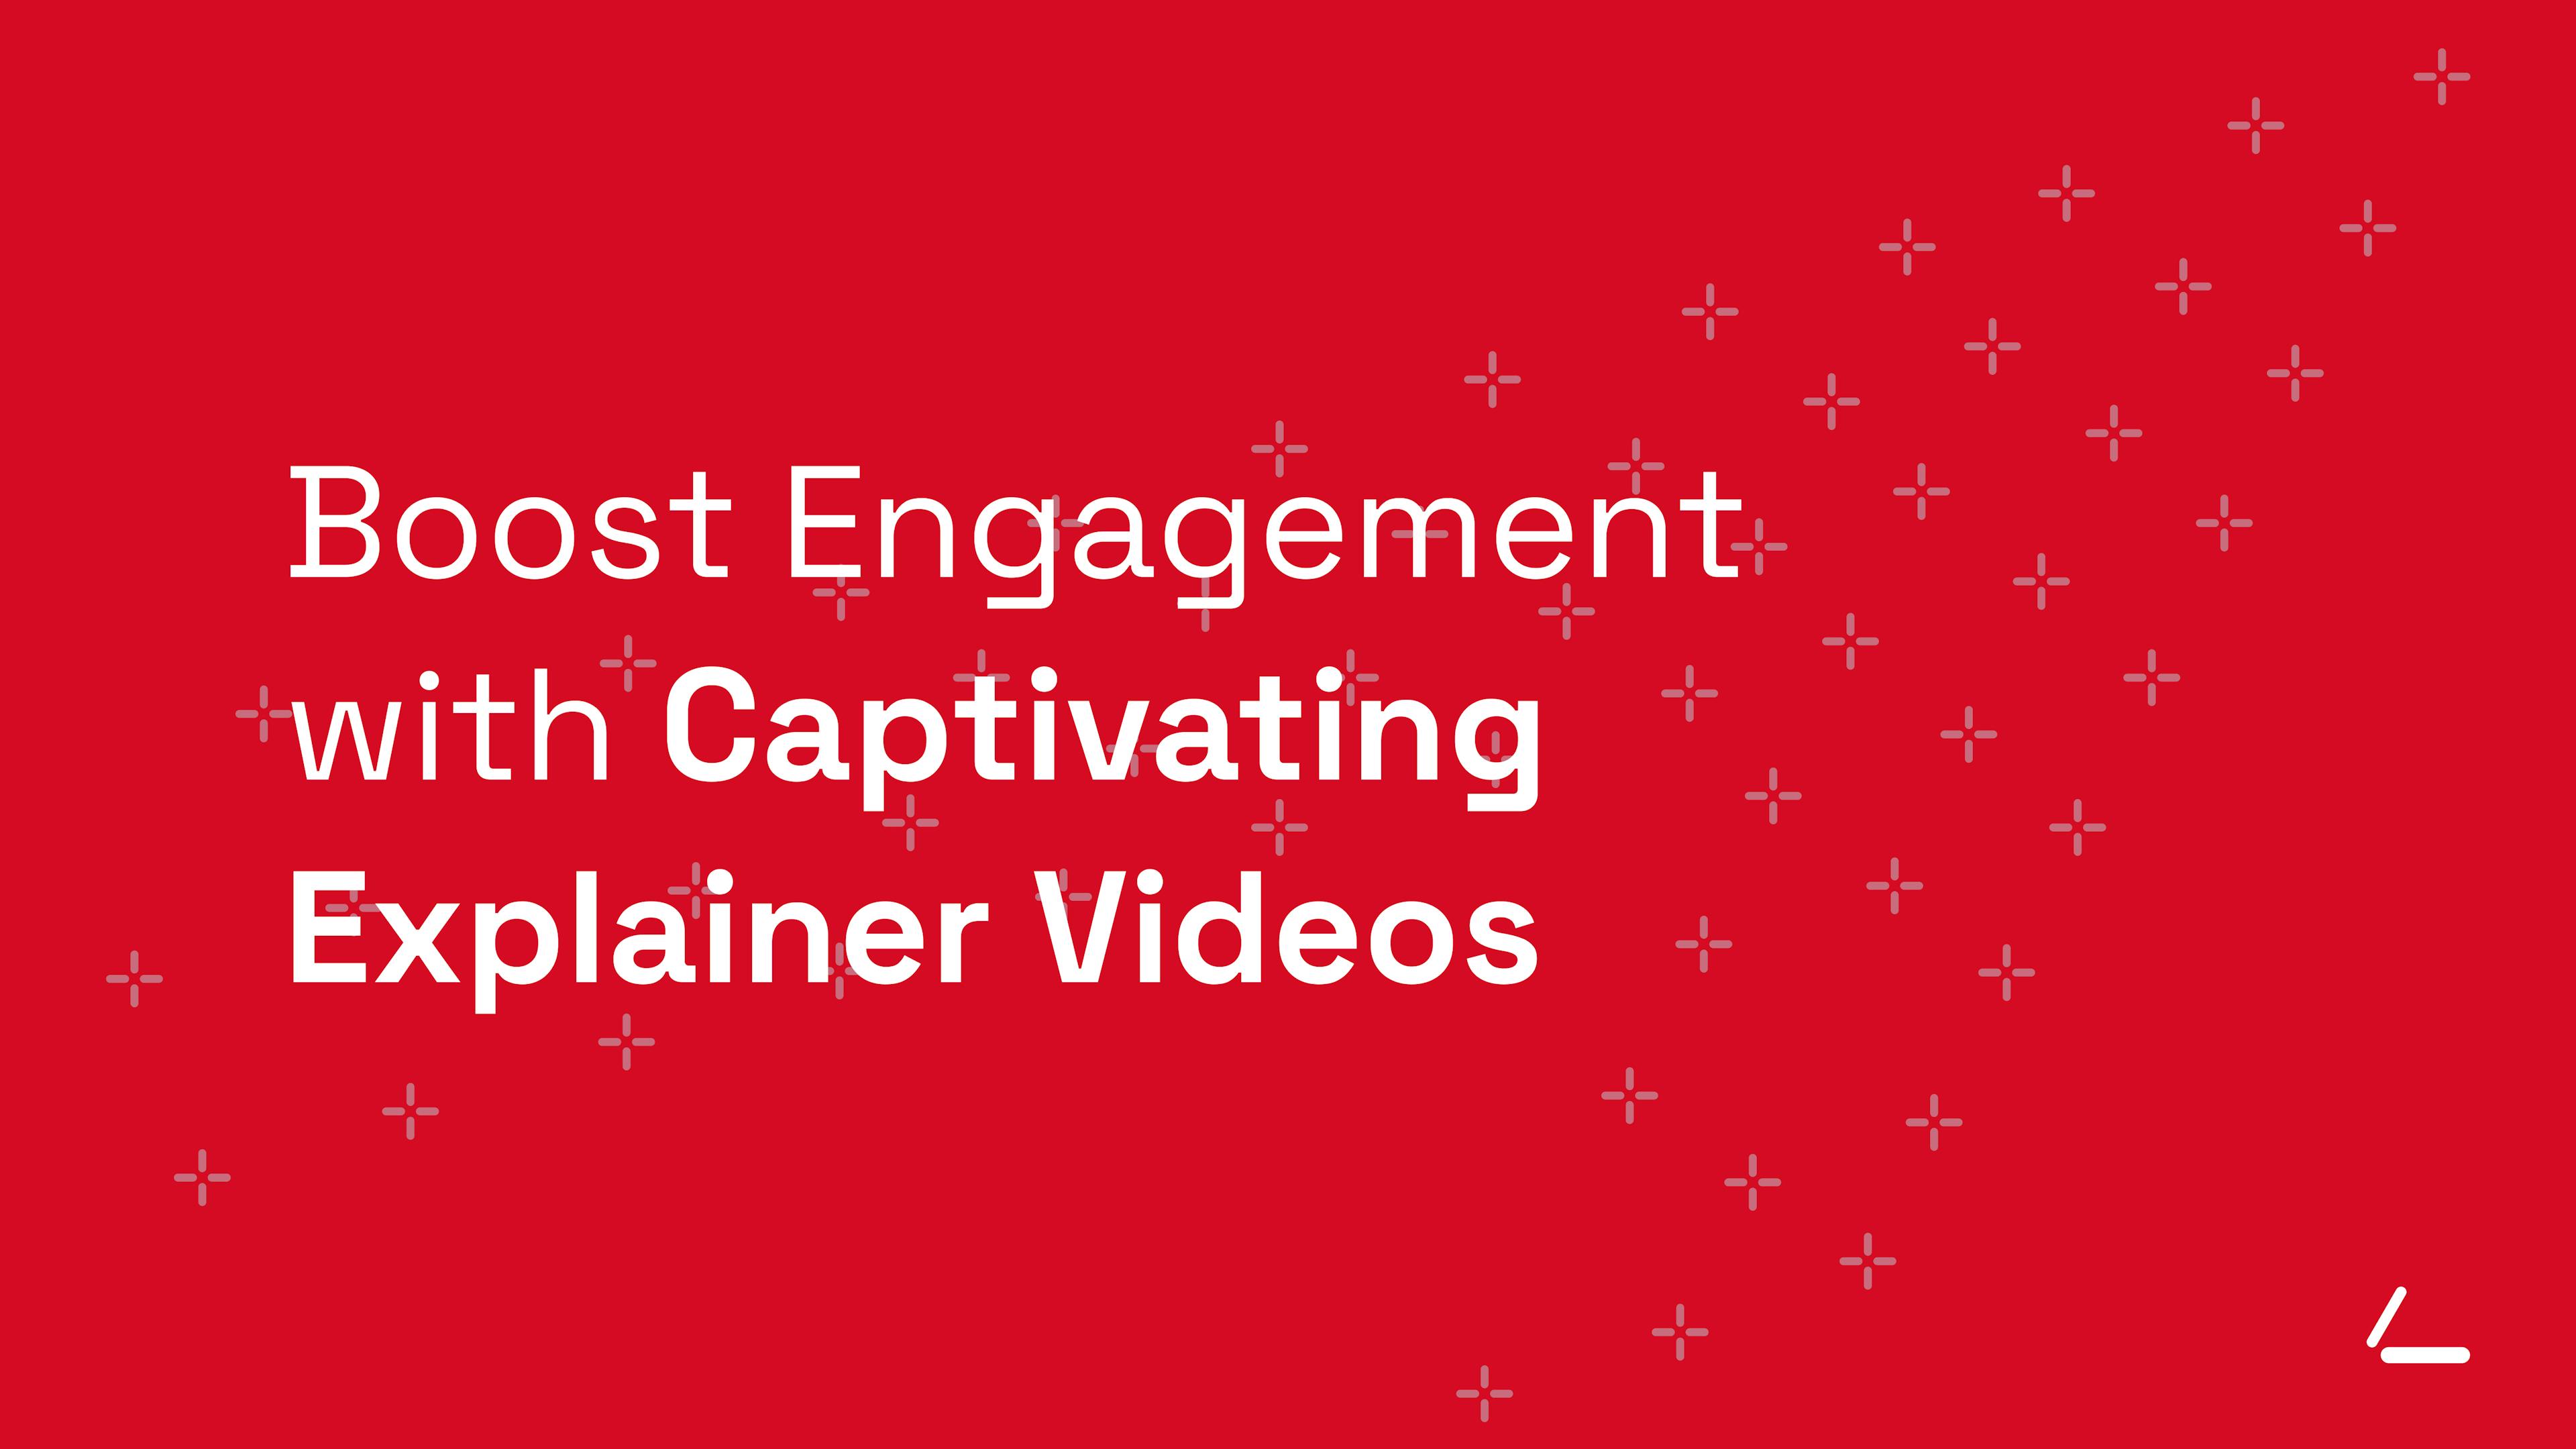 SEO Article Header - Red background with text about creating captivating explainer videos.